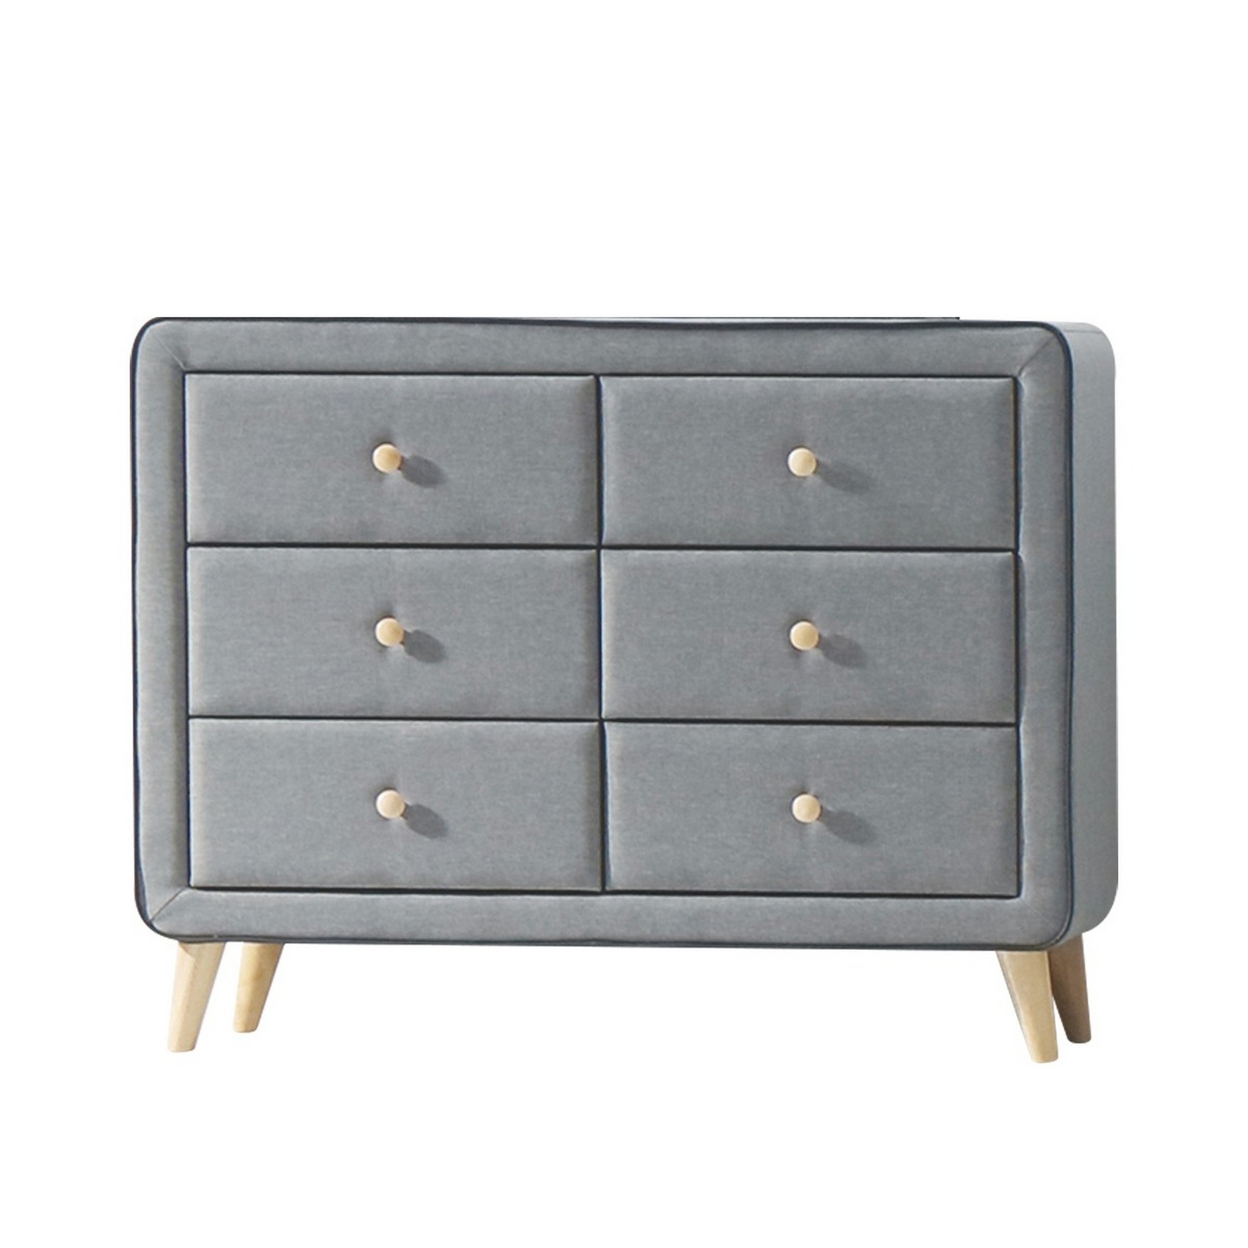 Transitional Style Wood And Fabric Upholstery Dresser With 6 Drawers, Gray- Saltoro Sherpi